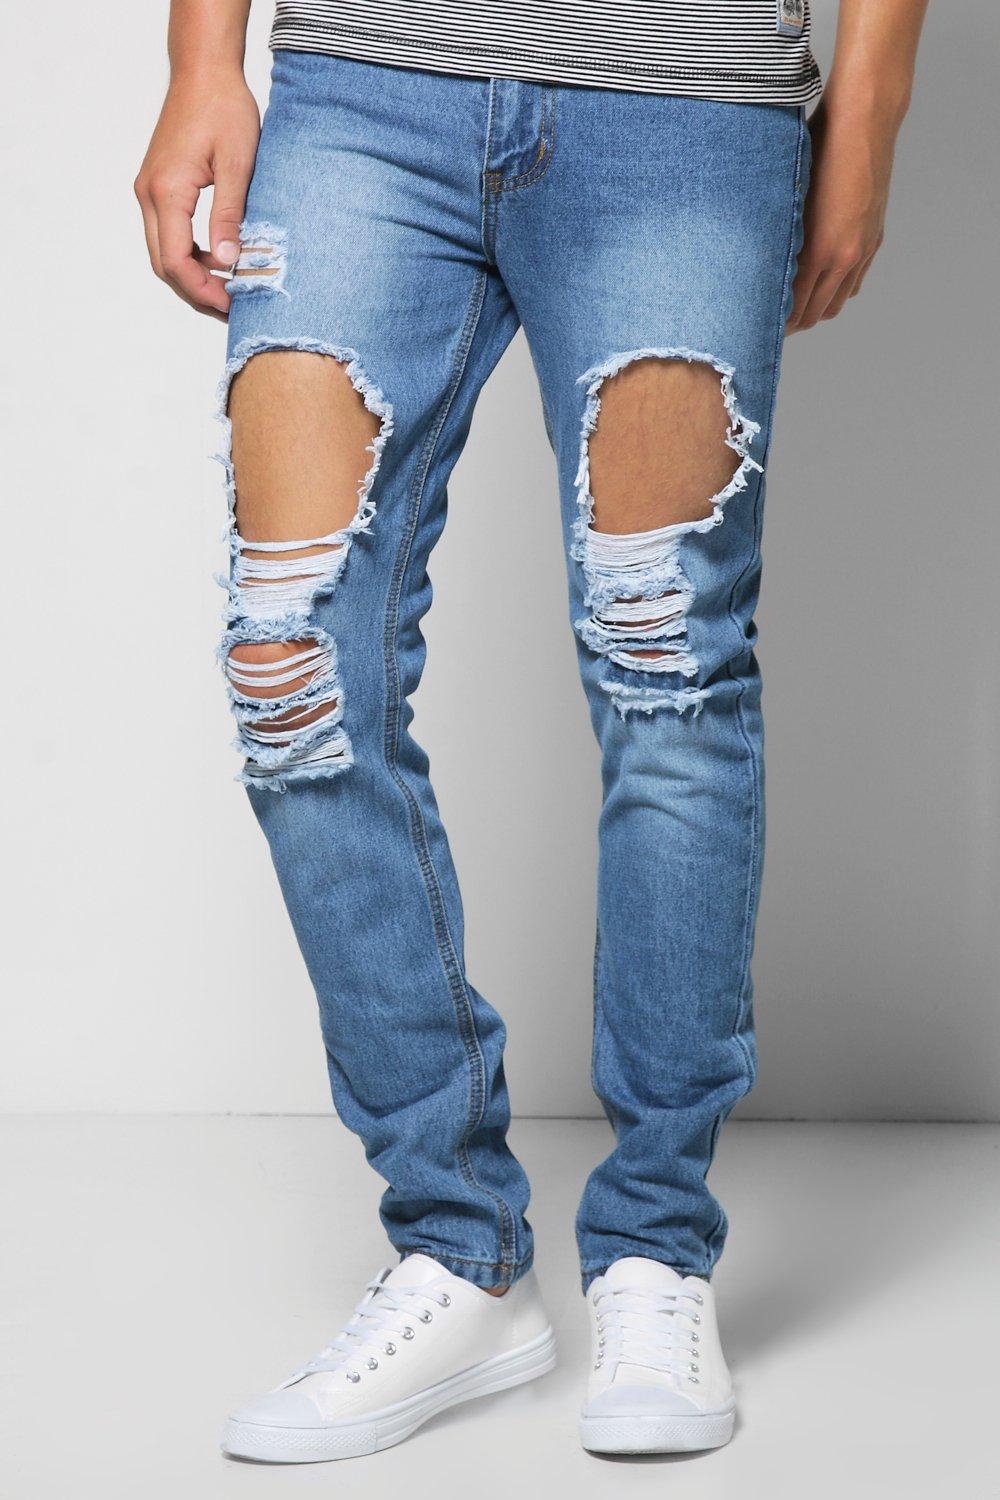 Slim Fit Vintage Wash Ripped Jeans at boohoo.com